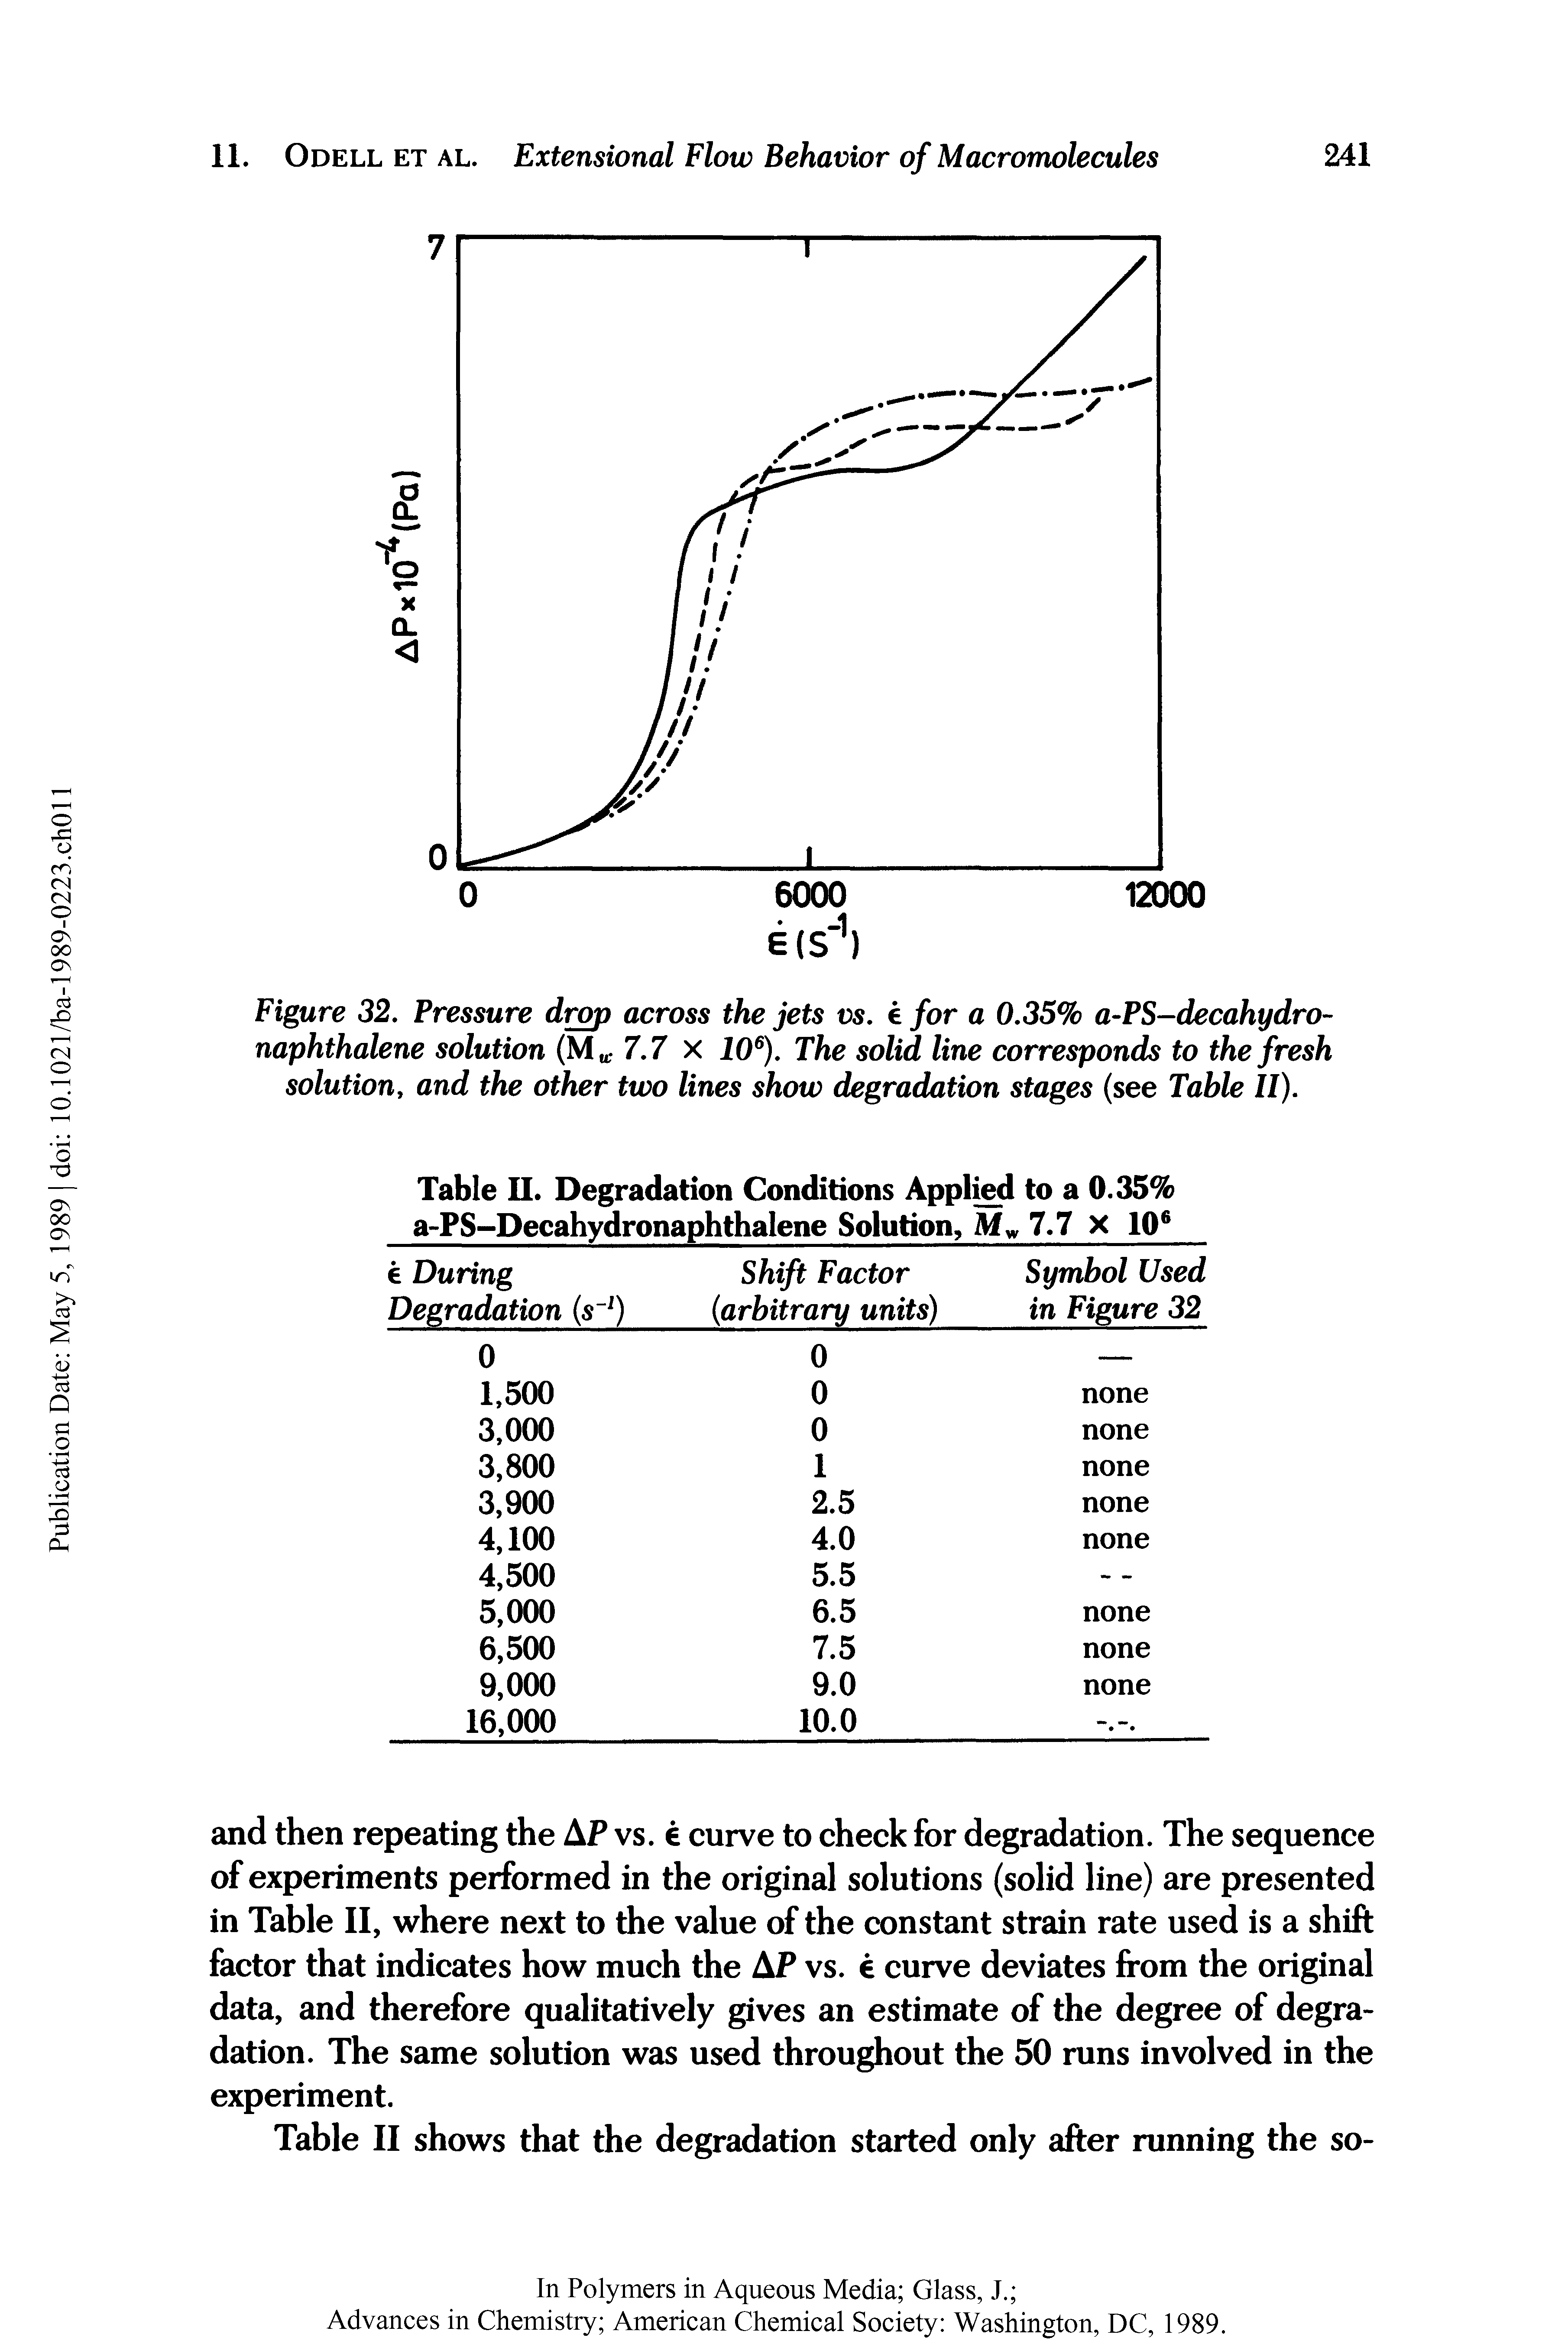 Figure 32. Pressure drop across the jets vs. e for a 0.35% a-PS-decahydro-naphthalene solution (M - 7.7 x JO ). The solid line corresponds to the fresh solution and the other two lines show degradation stages (see Table II).